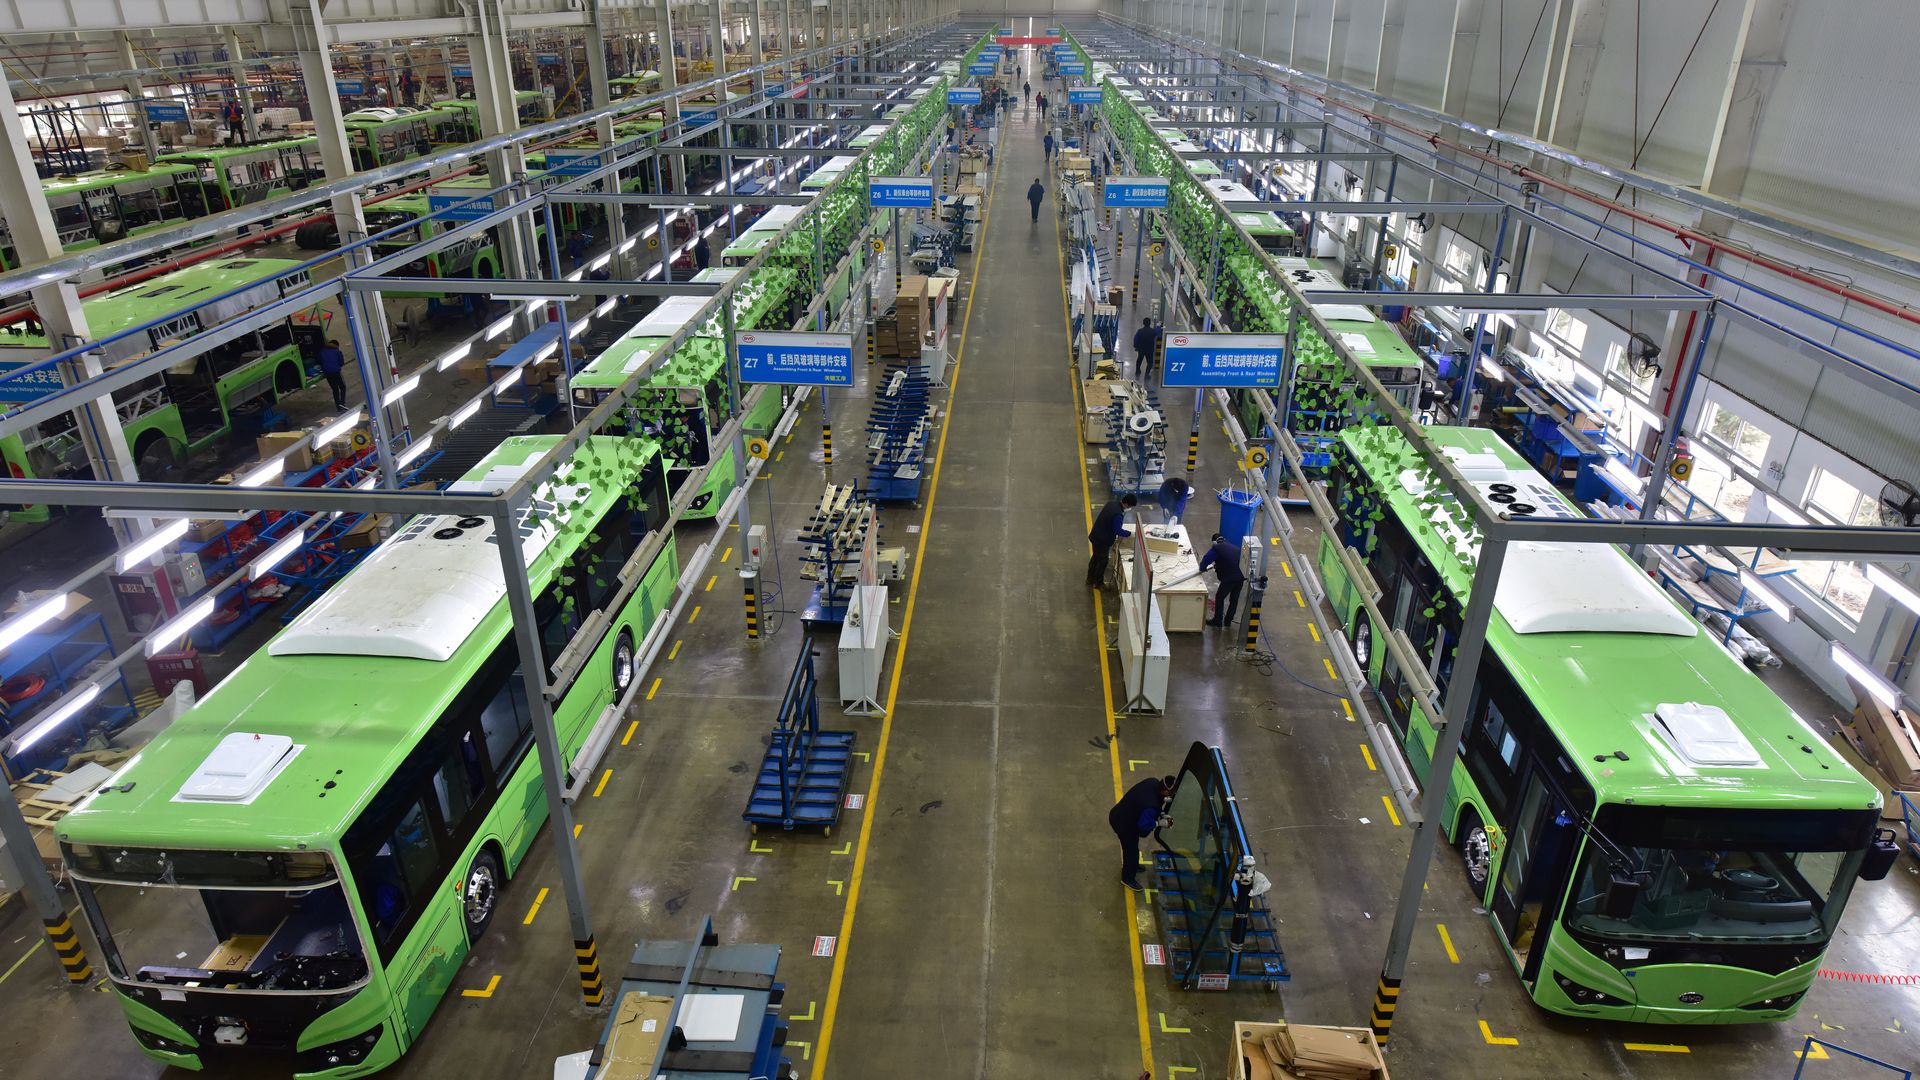 Employees work on the assembly line of the electric bus at a BYD's production base on January 23, 2018 in Xi an, Shaanxi Province of China